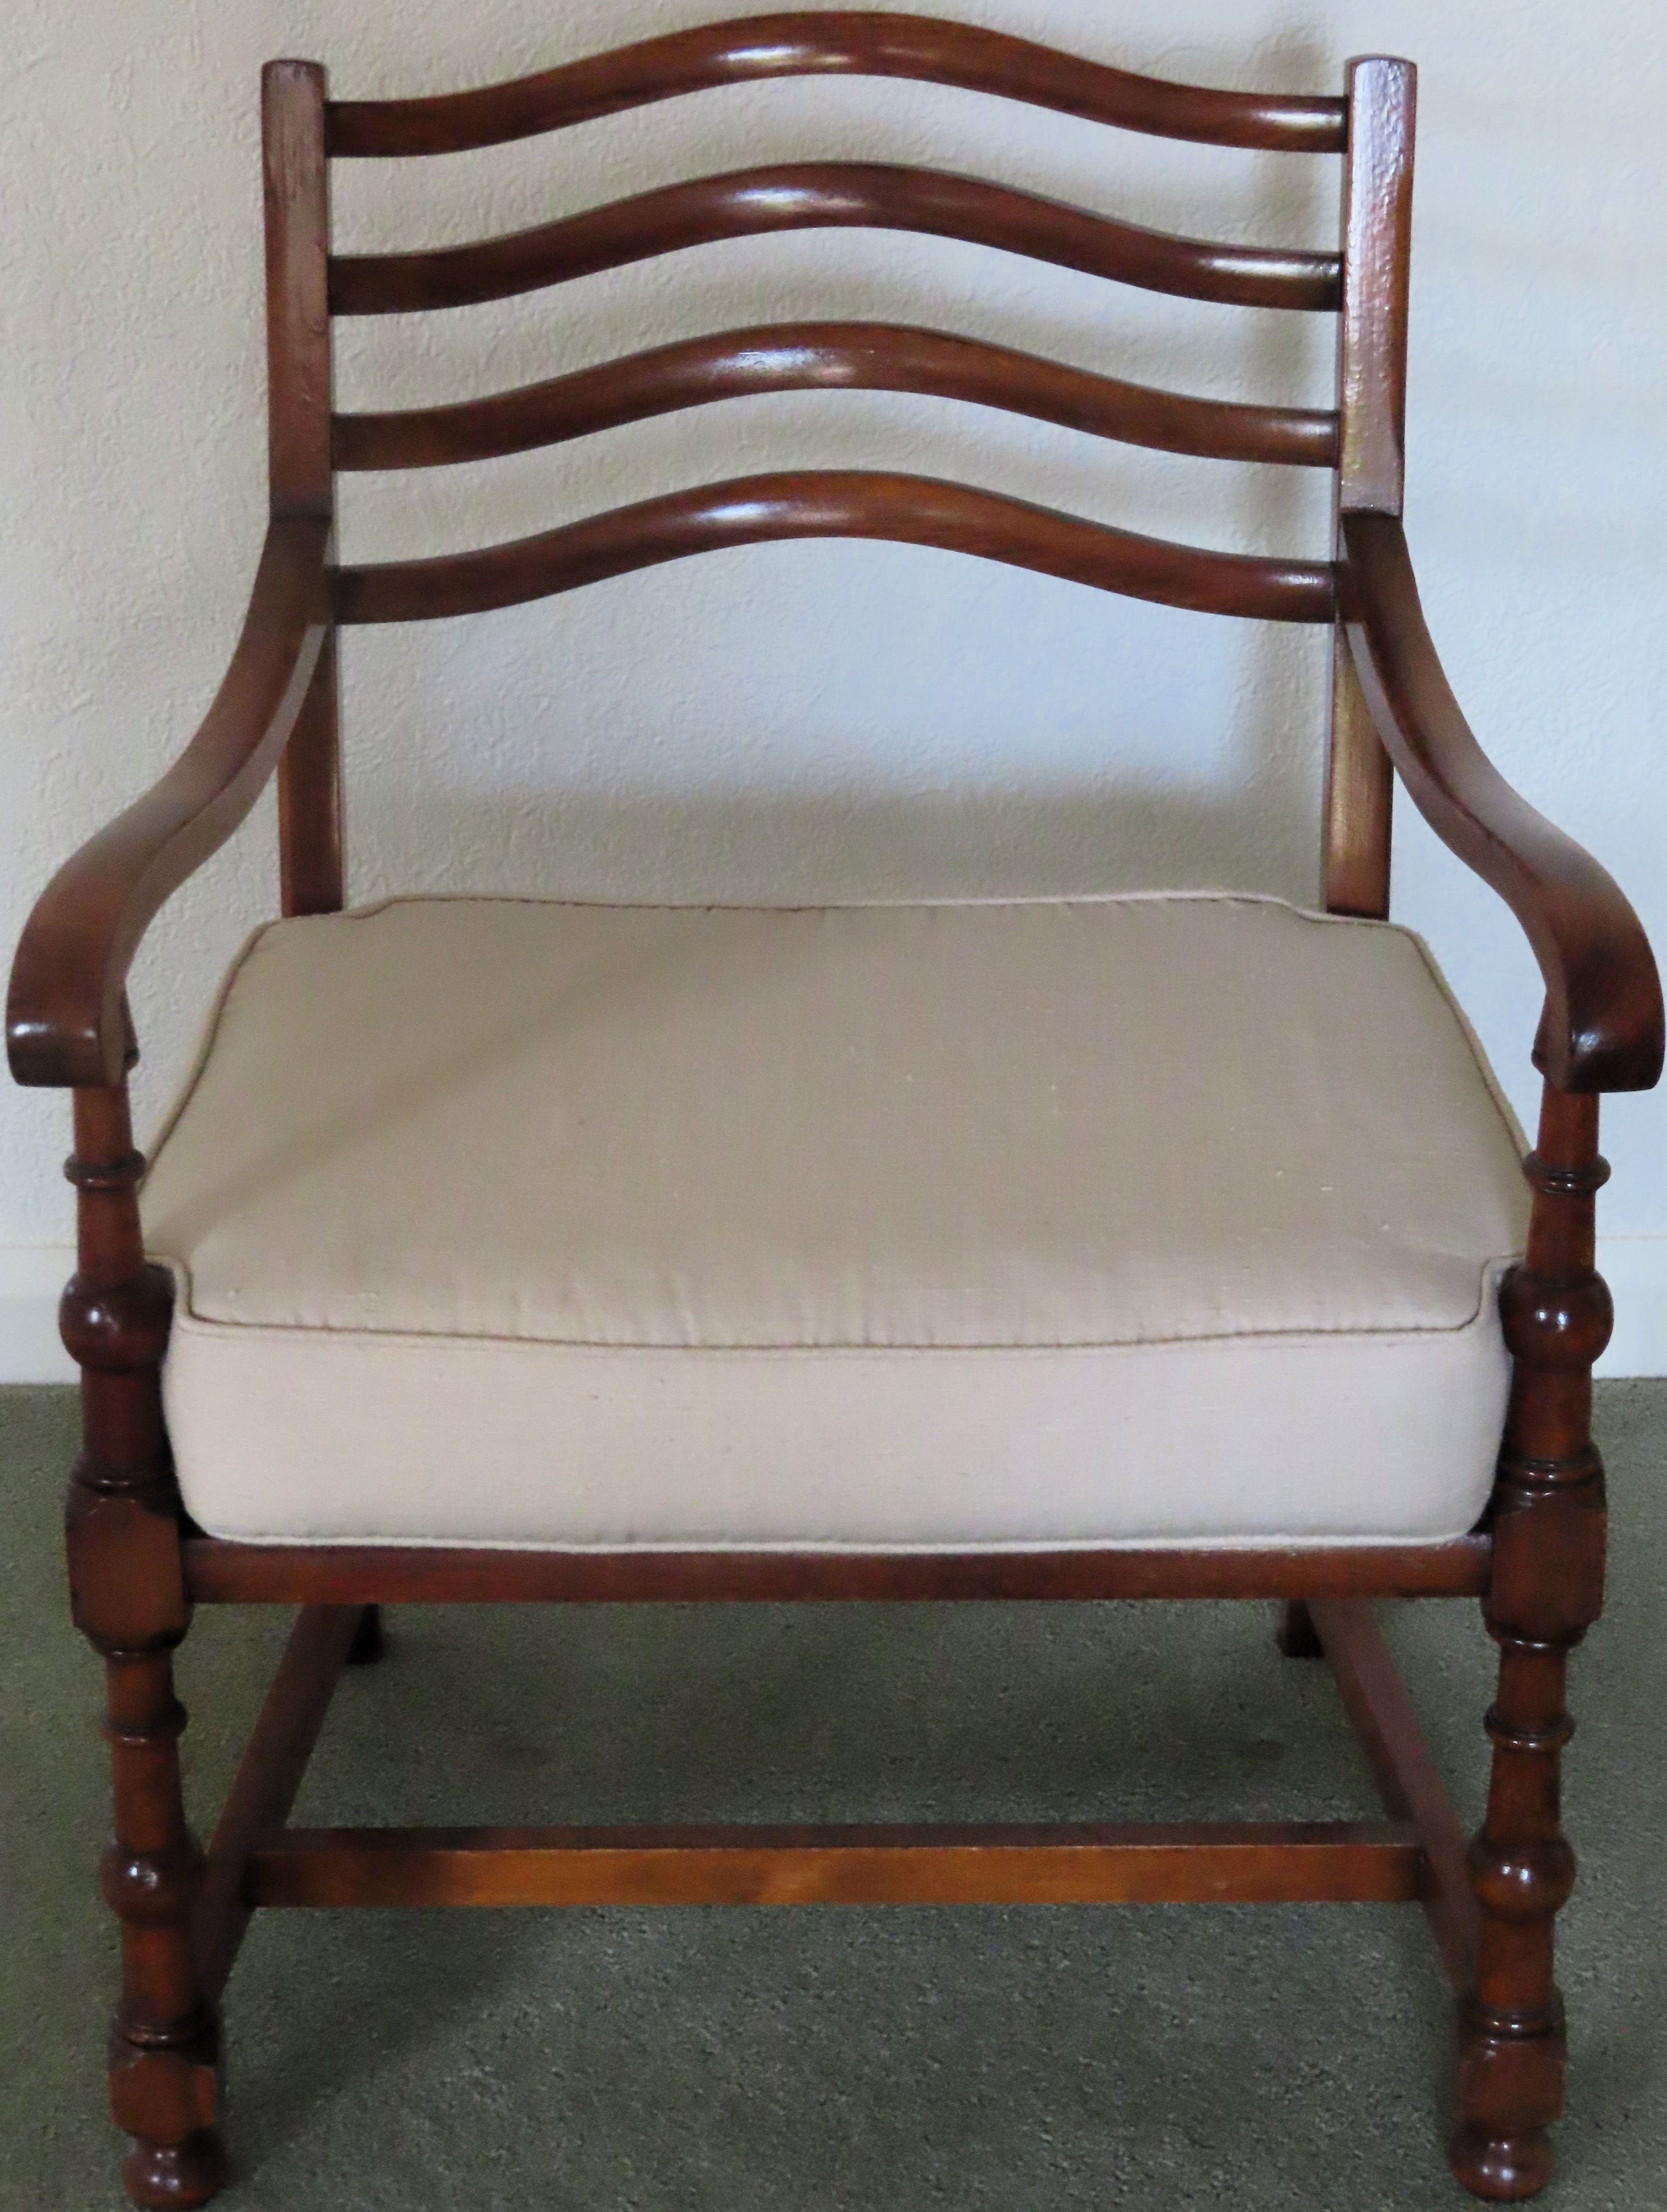 20th century mahogany bergere seated ladderback armchair. Approx. 77cms H reasonable used